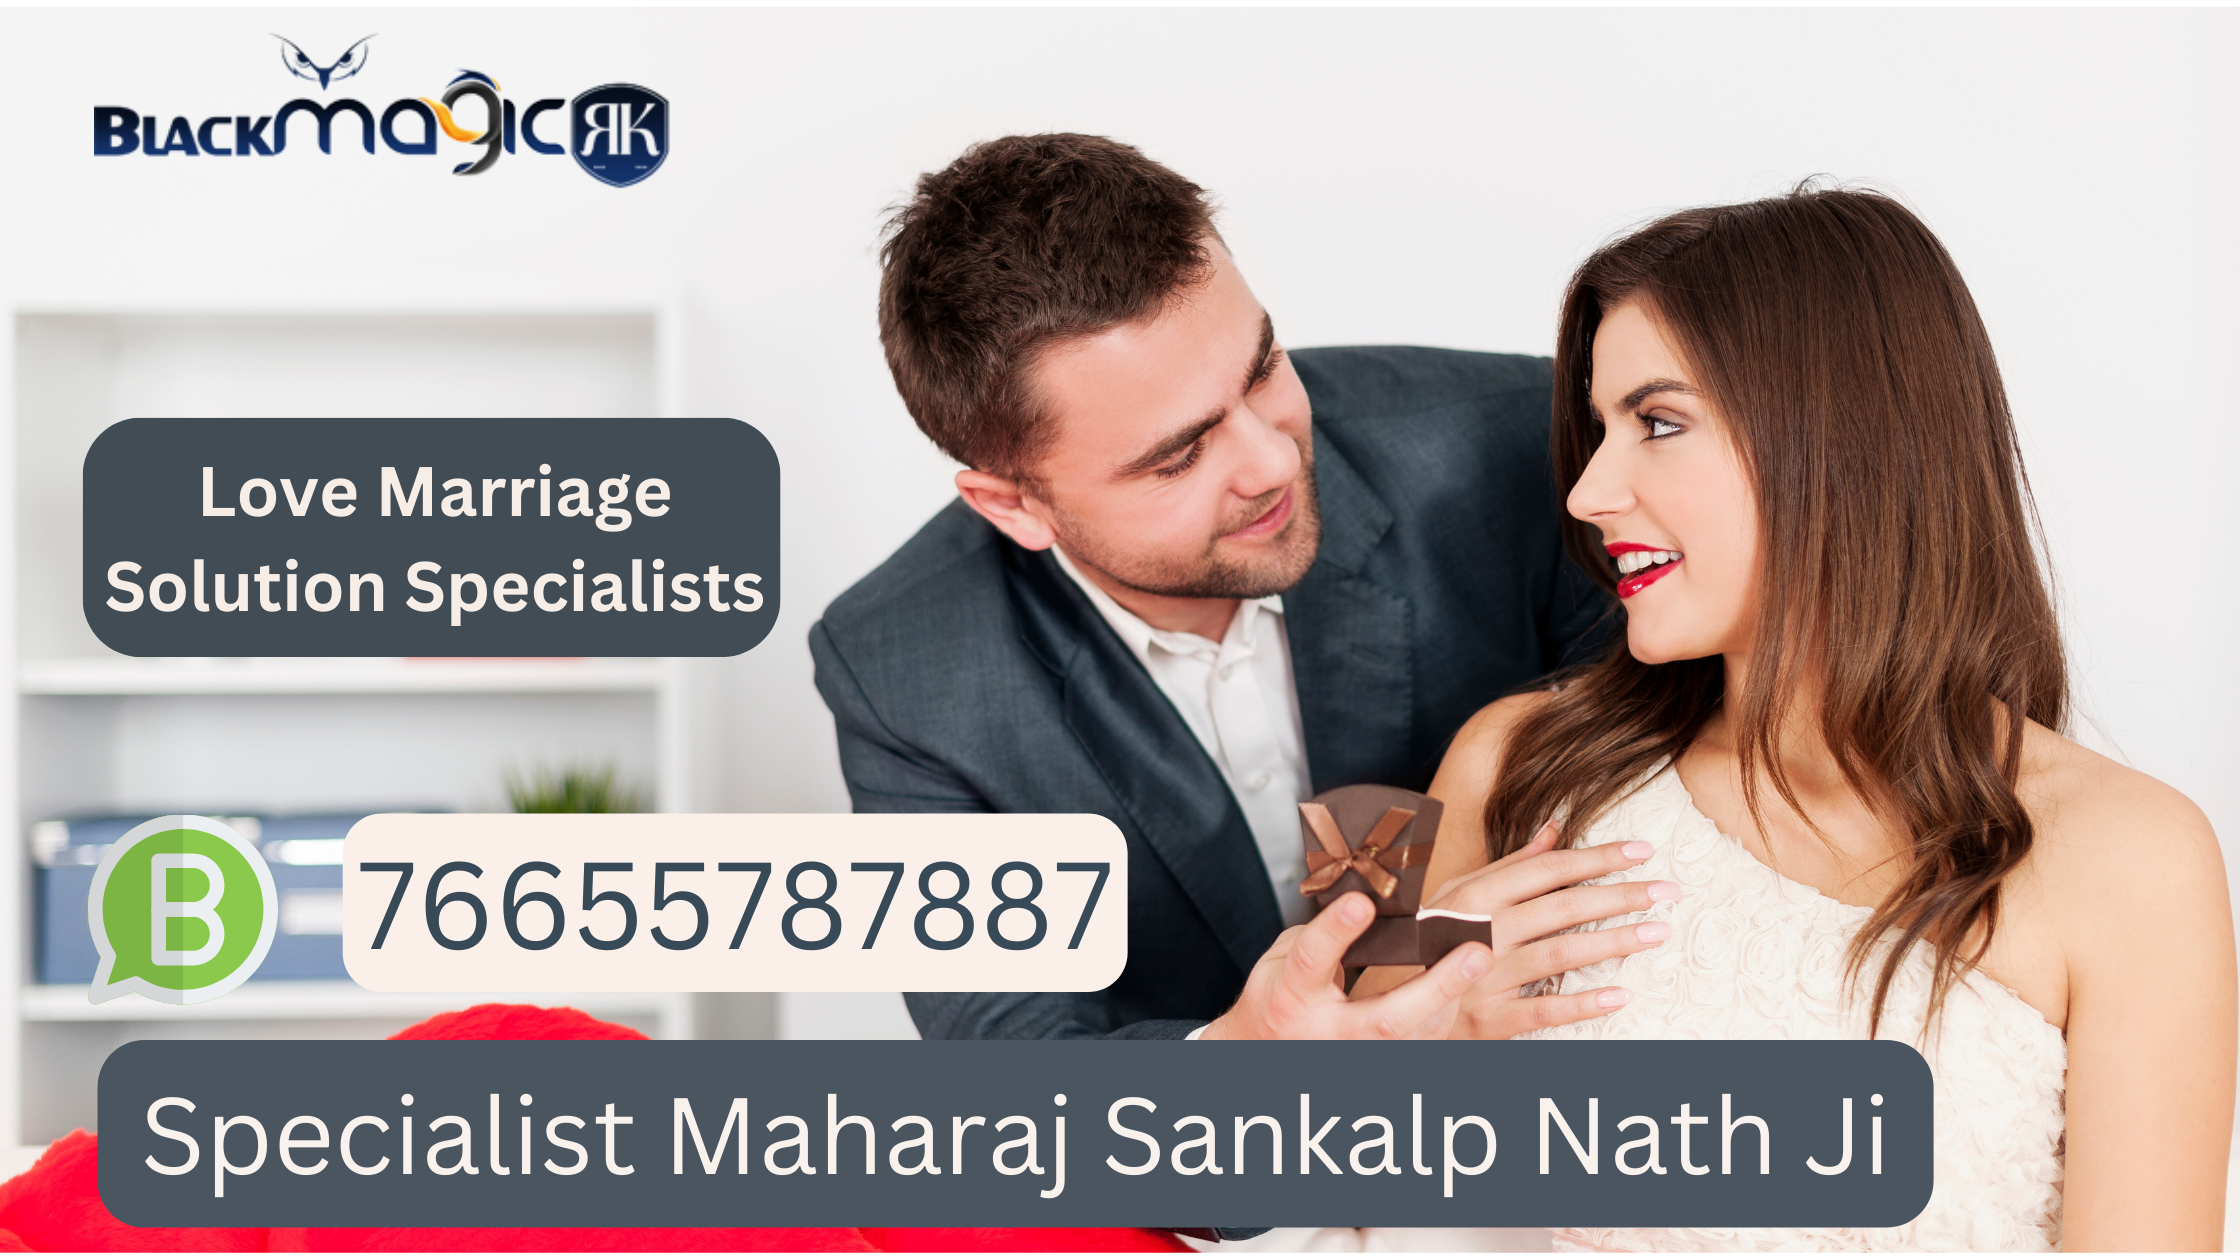 Love Marriage Solution Specialists in New York